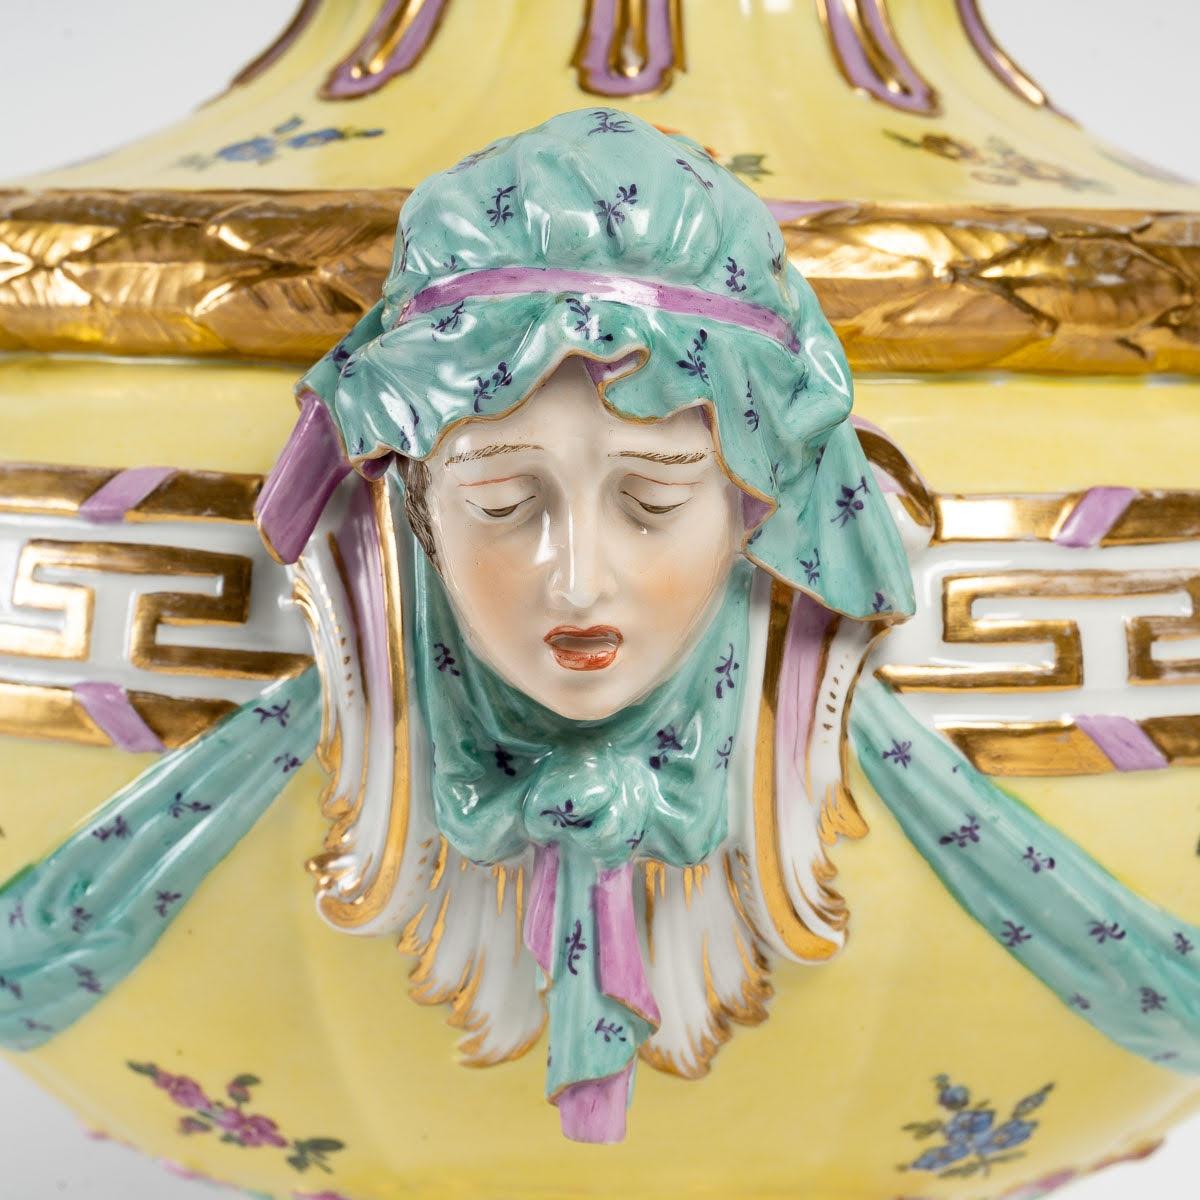 European Covered Pot in Berlin Porcelain, KPM Manufactory, 19th Century. For Sale